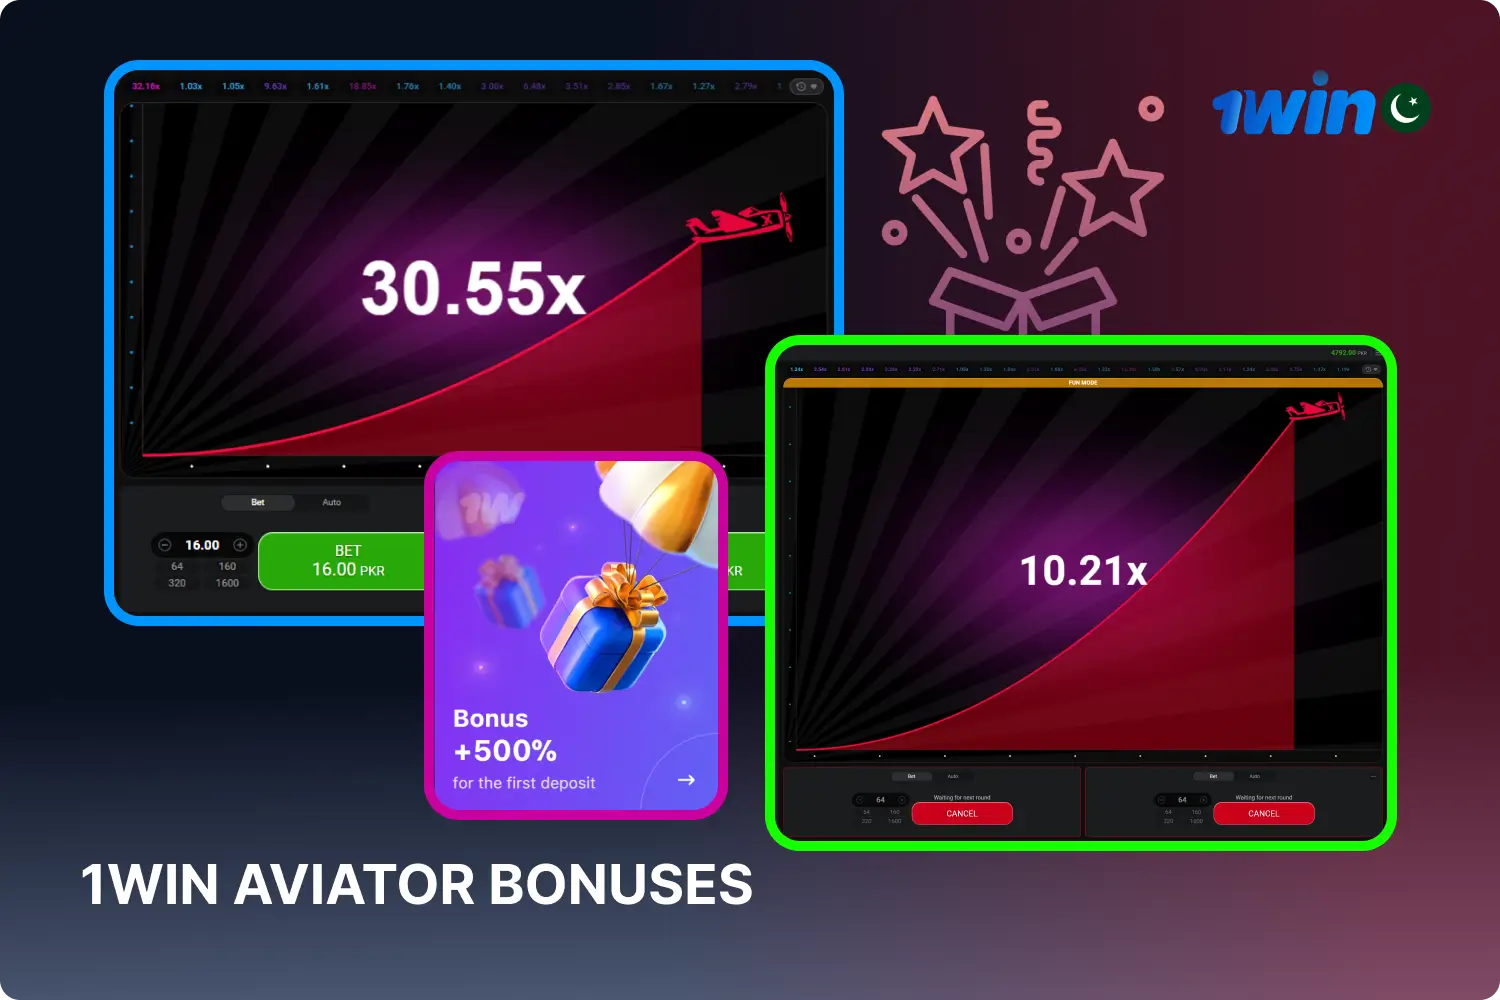 Aviator players can use the welcome bonus from 1win casino